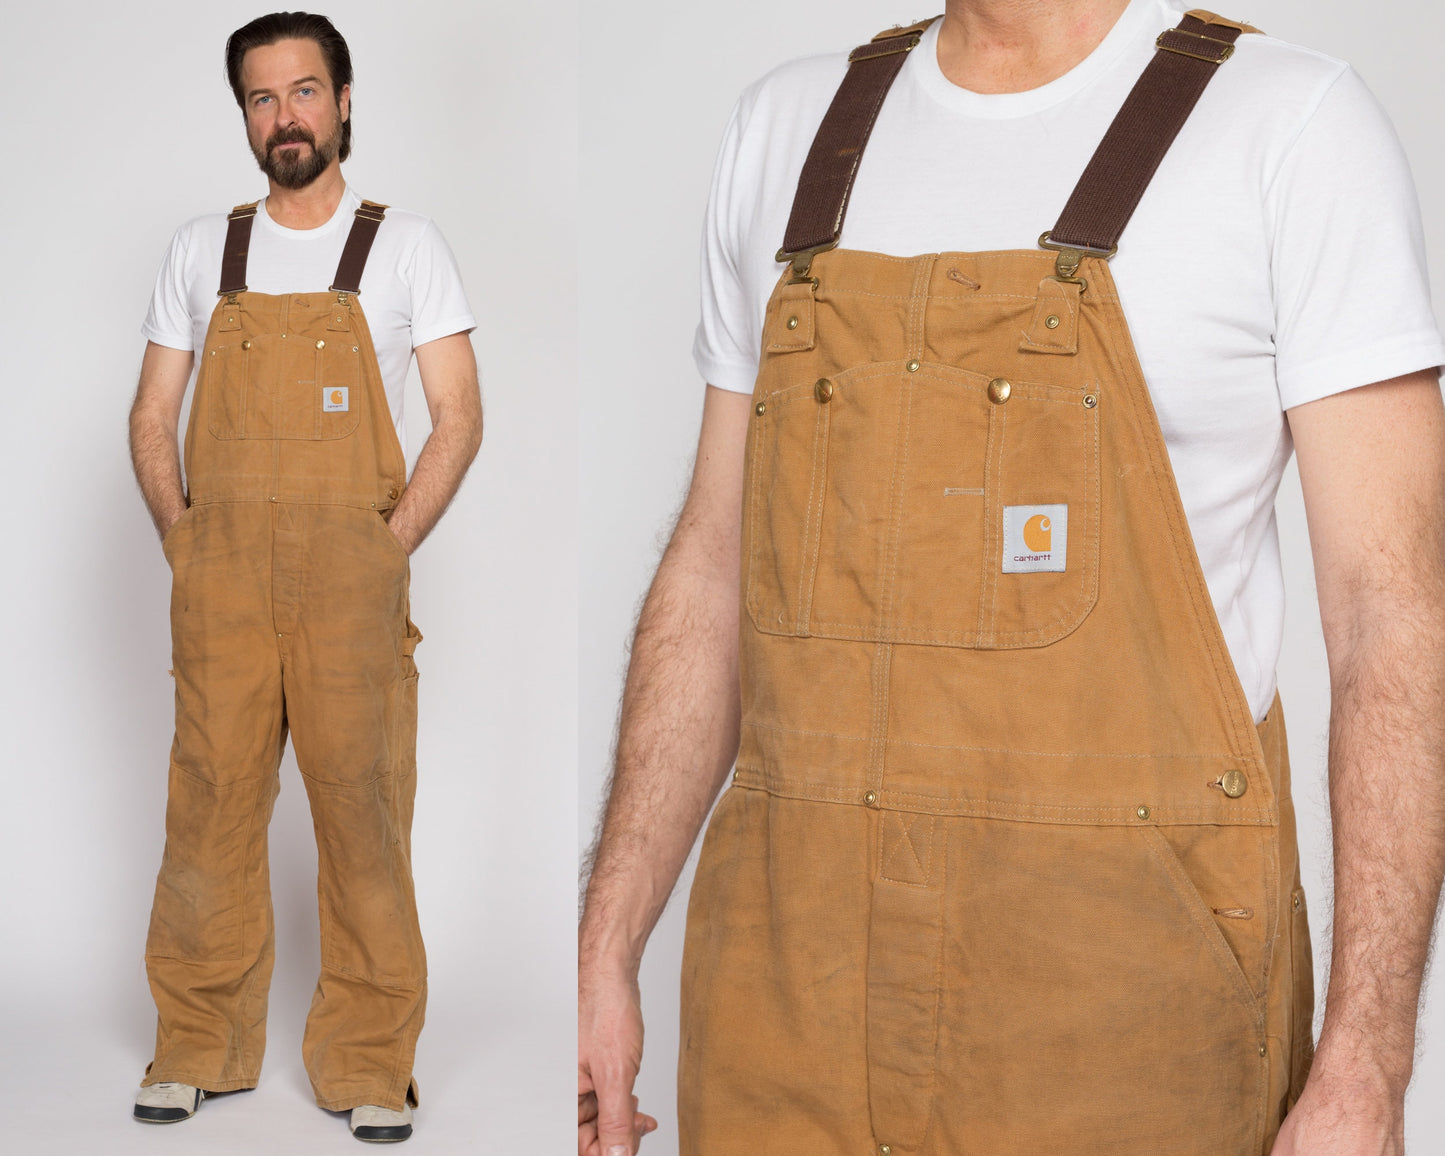 XL Vintage Carhartt Tan Insulated Overalls | 90s Quilt Lined Duck Canvas Workwear Jumpsuit